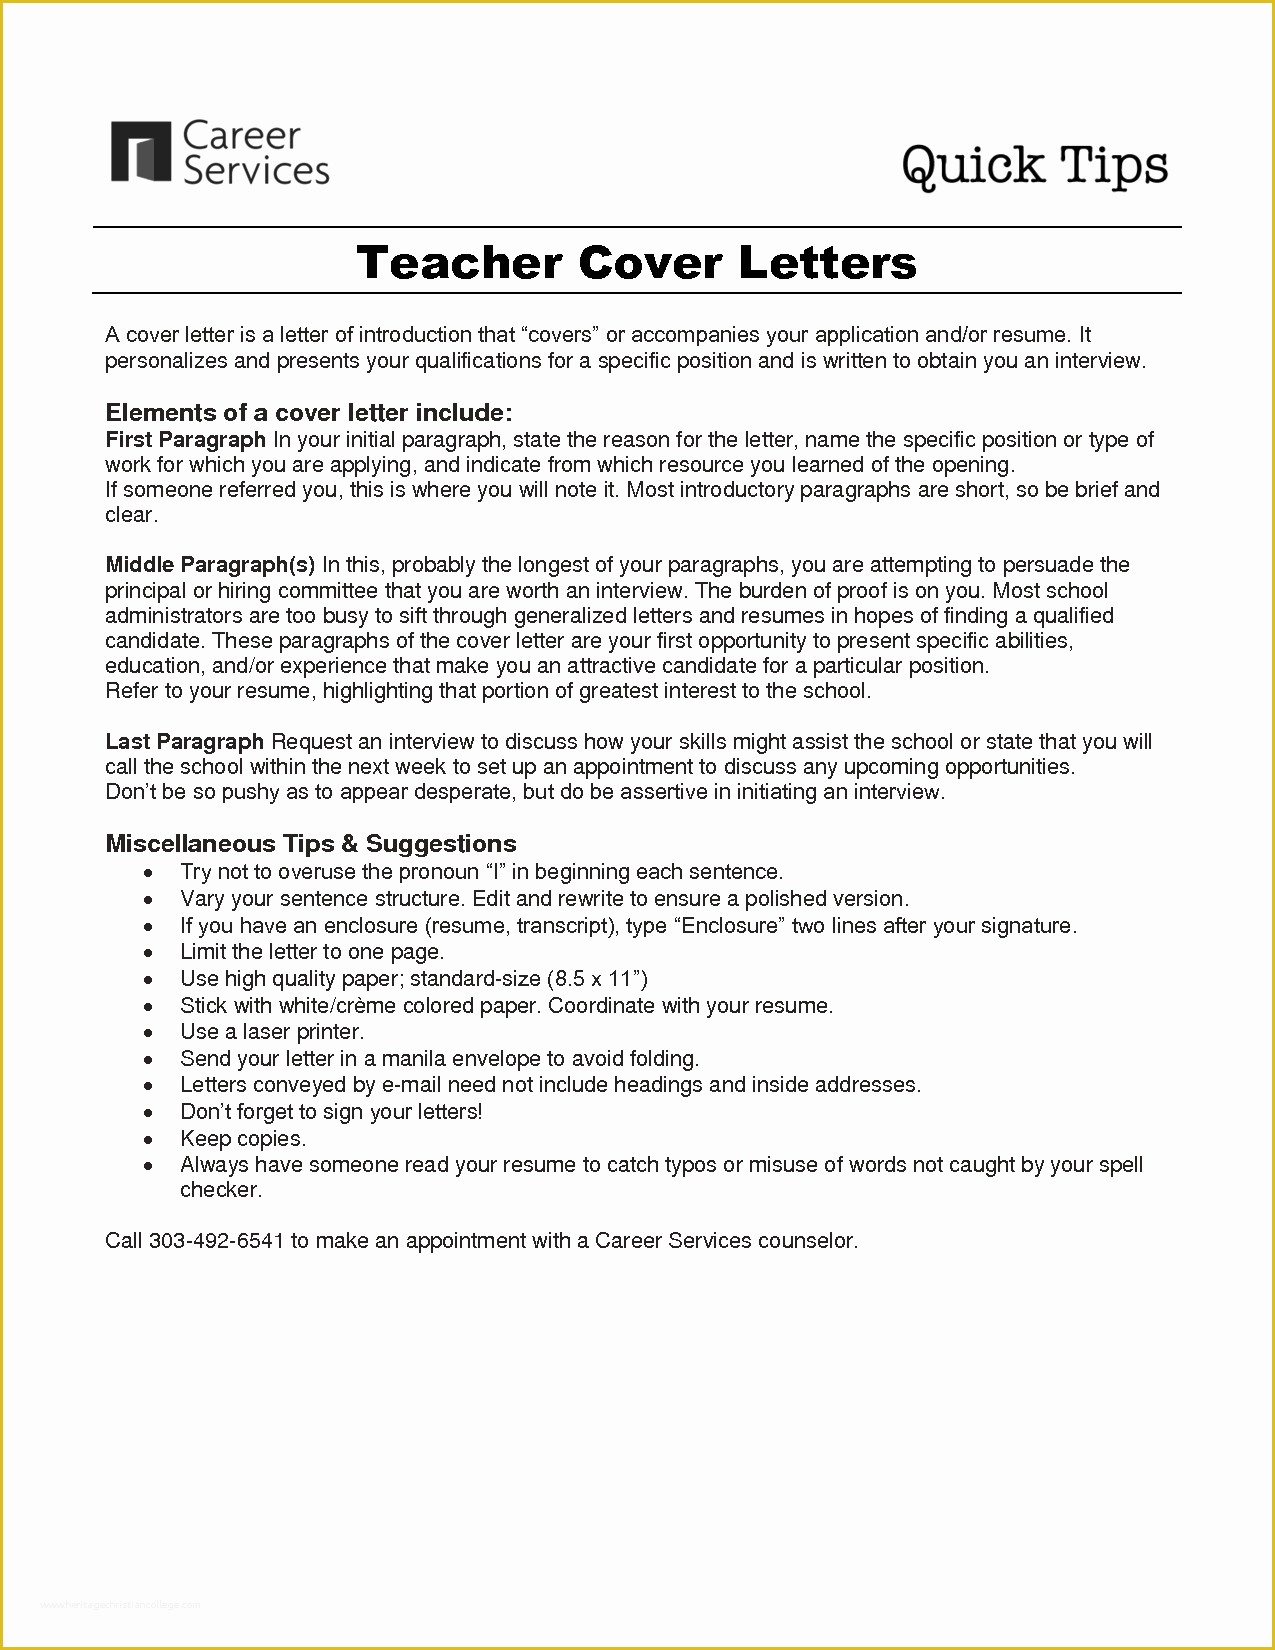 Teacher Cover Letter Template Free Of Pin by Lynn King On Advice Pinterest